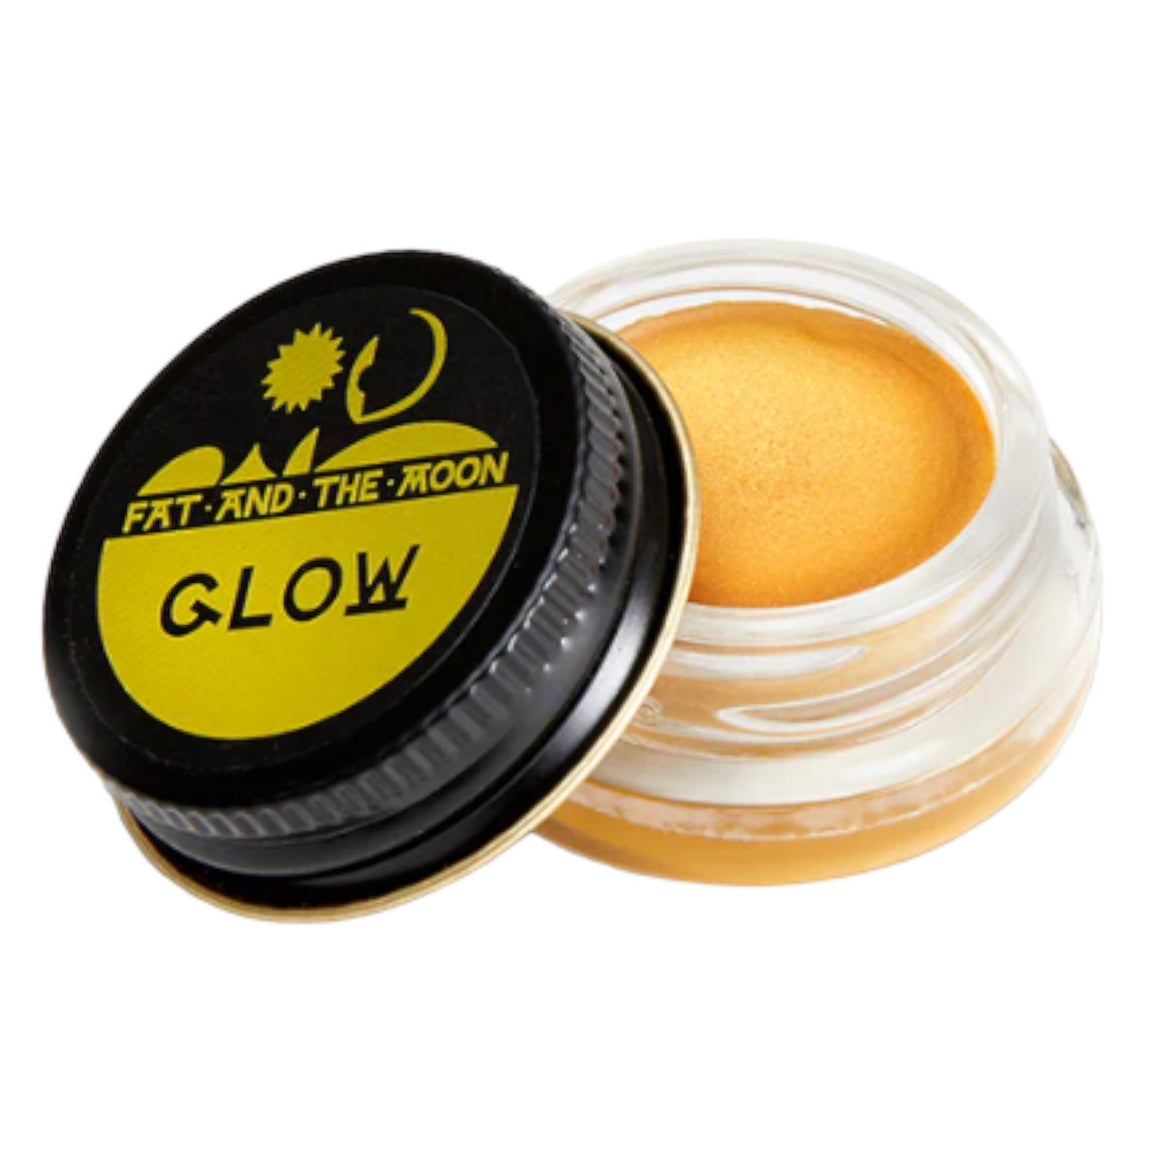 Glow Highlighter 0.15oz - Fat & The Moon